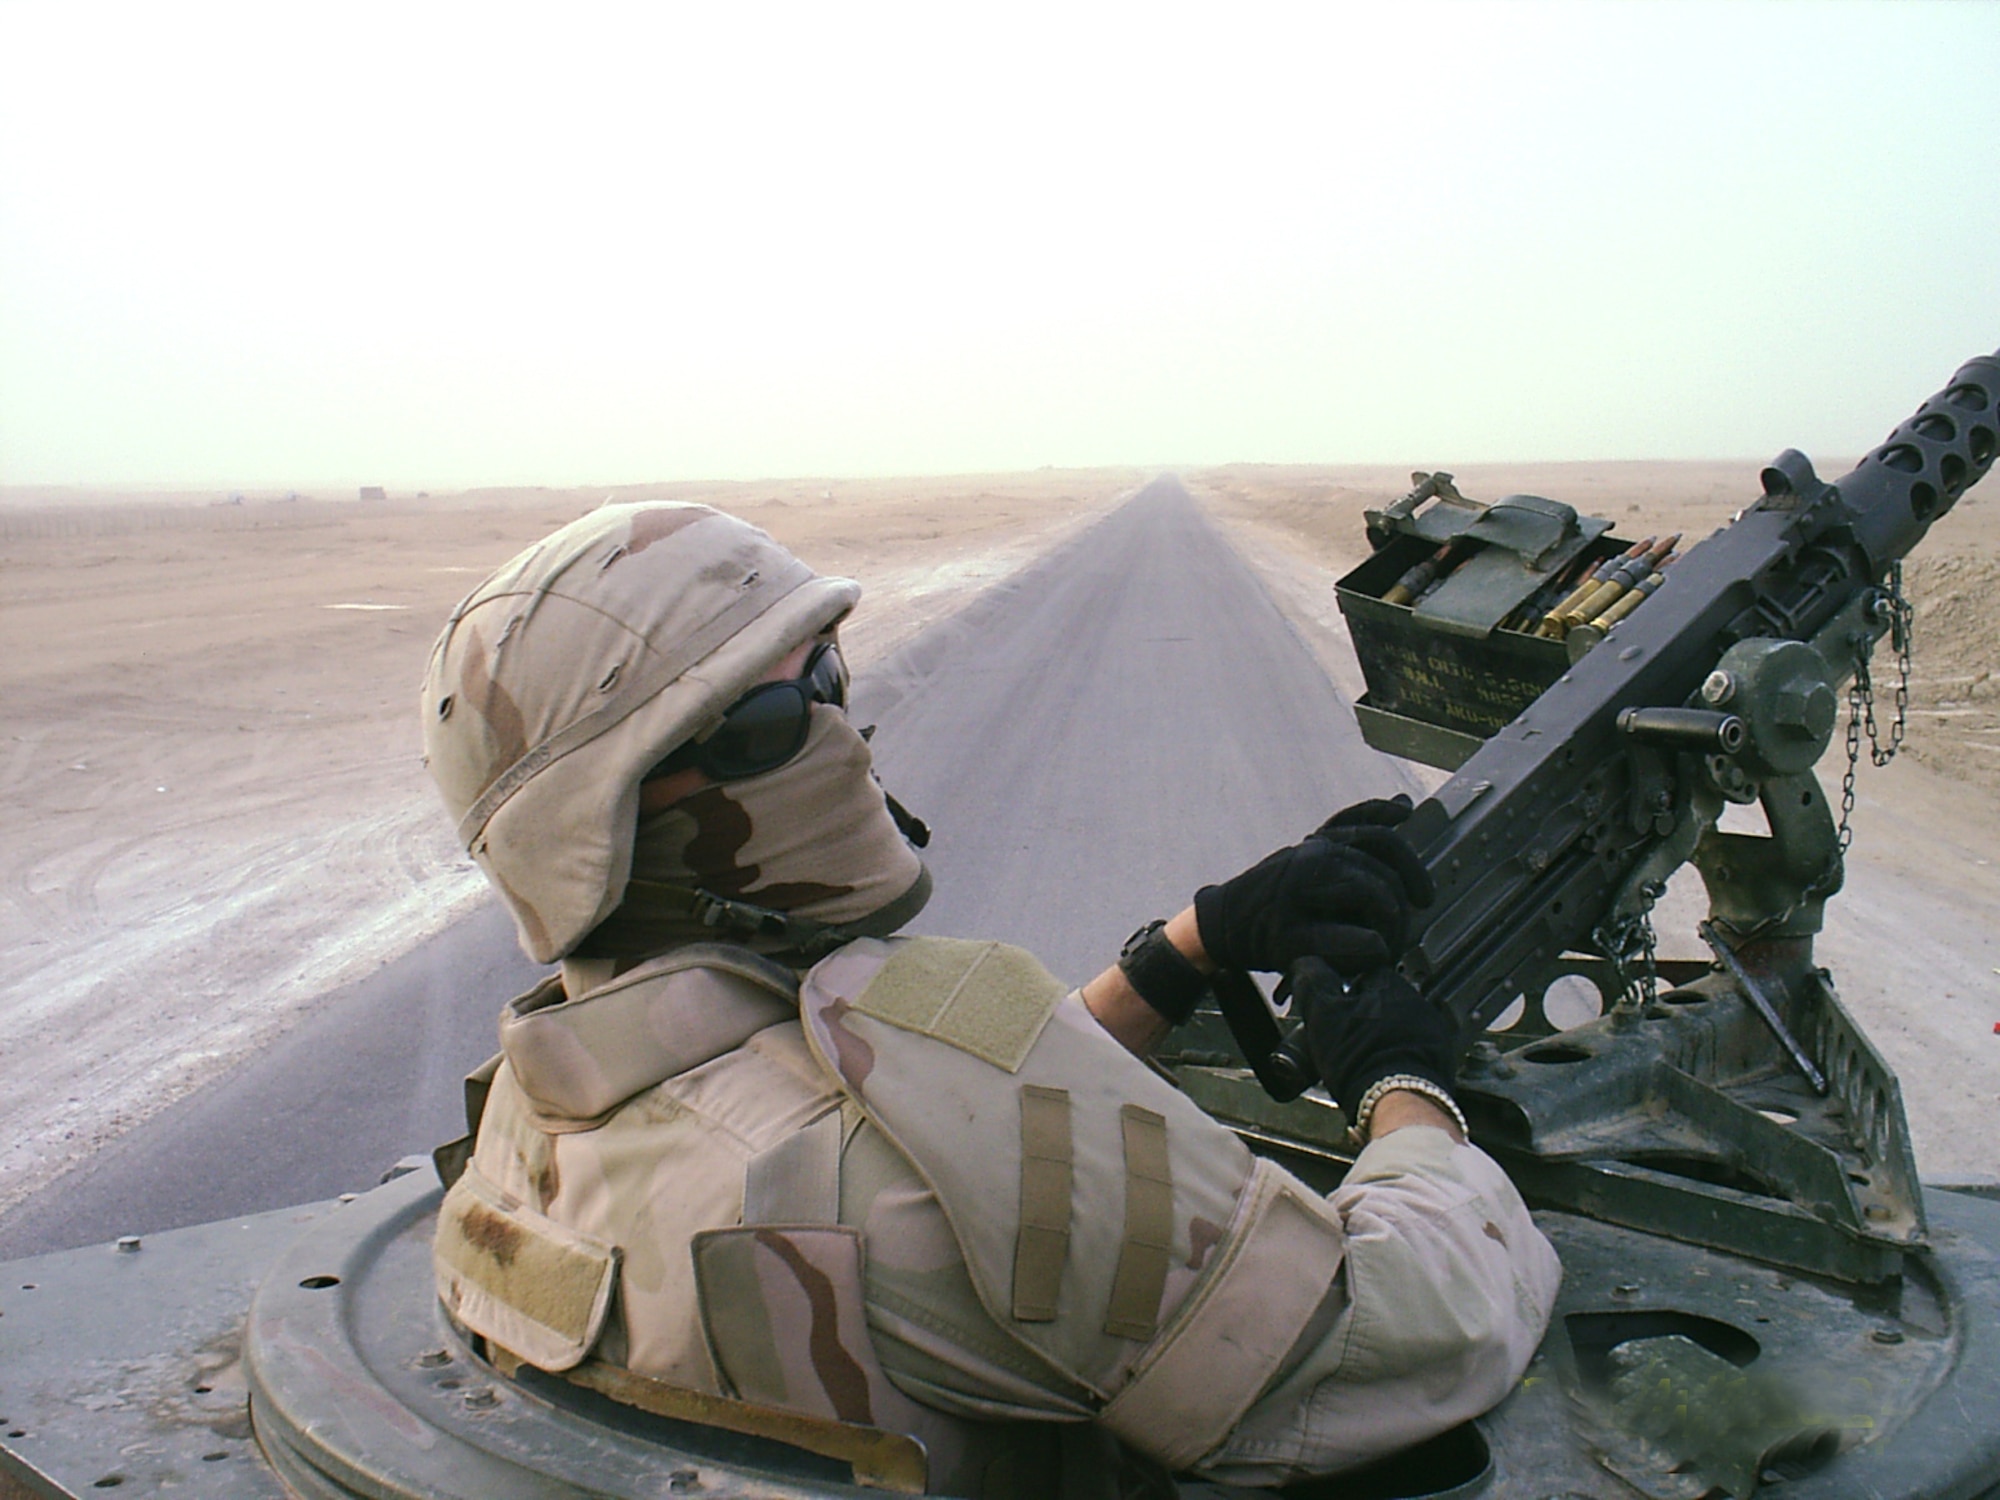 Master Sgt. William Geiger Jr. of the 78th Logistics Readiness Squadron spent time during three consecutive tours of duty in Iraq as a convoy commander. One memorable convoy, which led to a Bronze Star Medal with Valor and a uniform enshrined in a museum, endured seven insurgent attacks and lasted 13.5 hours. Courtesy photo